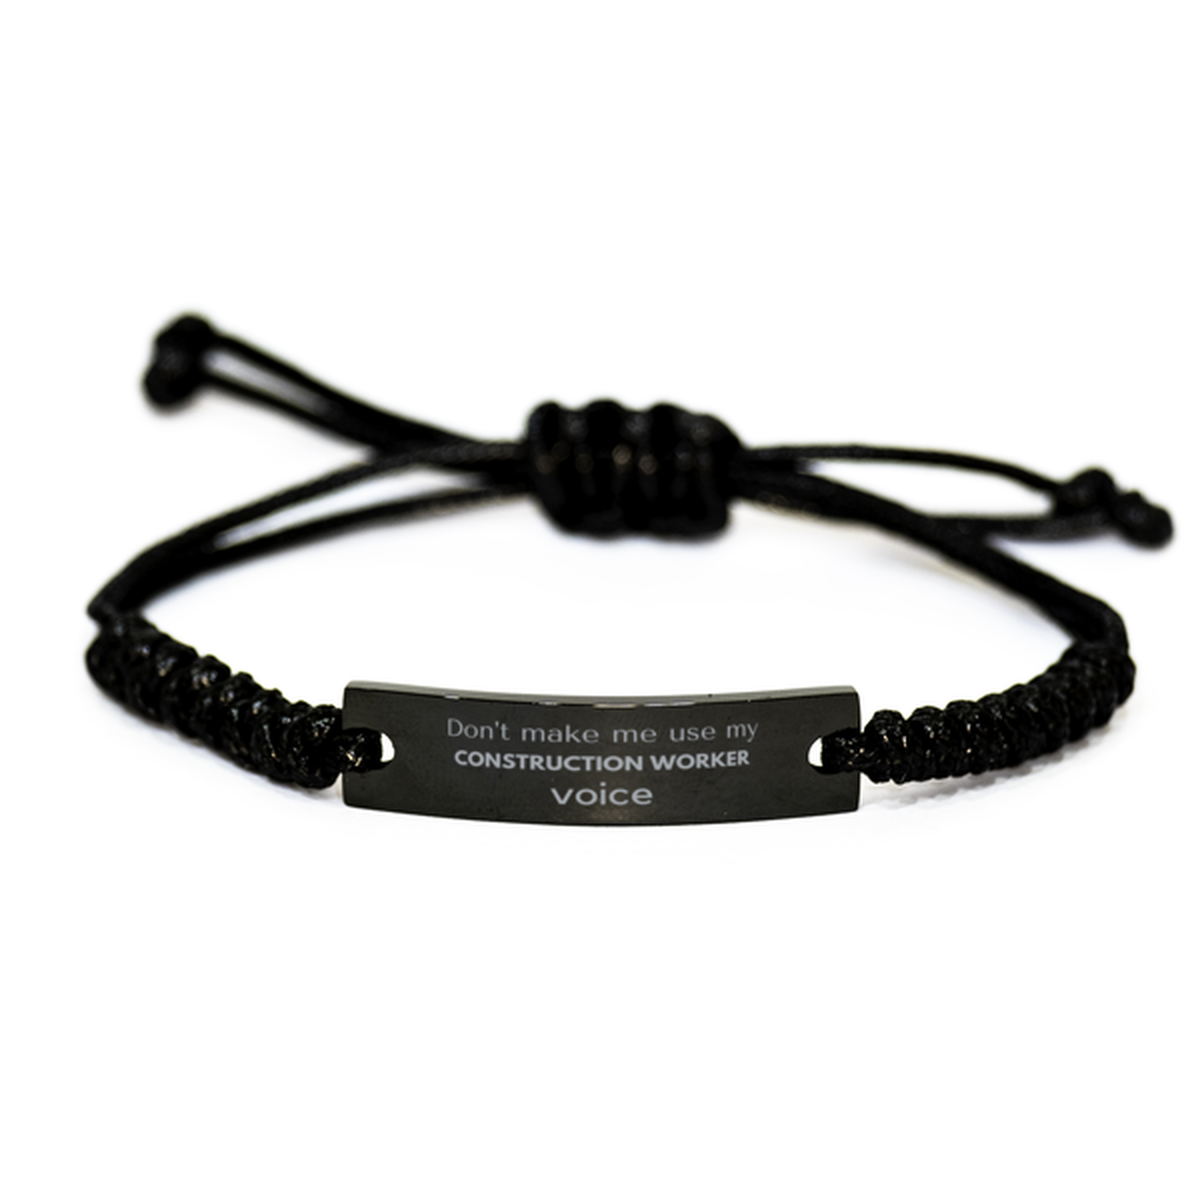 Don't make me use my Construction Worker voice, Sarcasm Construction Worker Gifts, Christmas Construction Worker Black Rope Bracelet Birthday Unique Gifts For Construction Worker Coworkers, Men, Women, Colleague, Friends